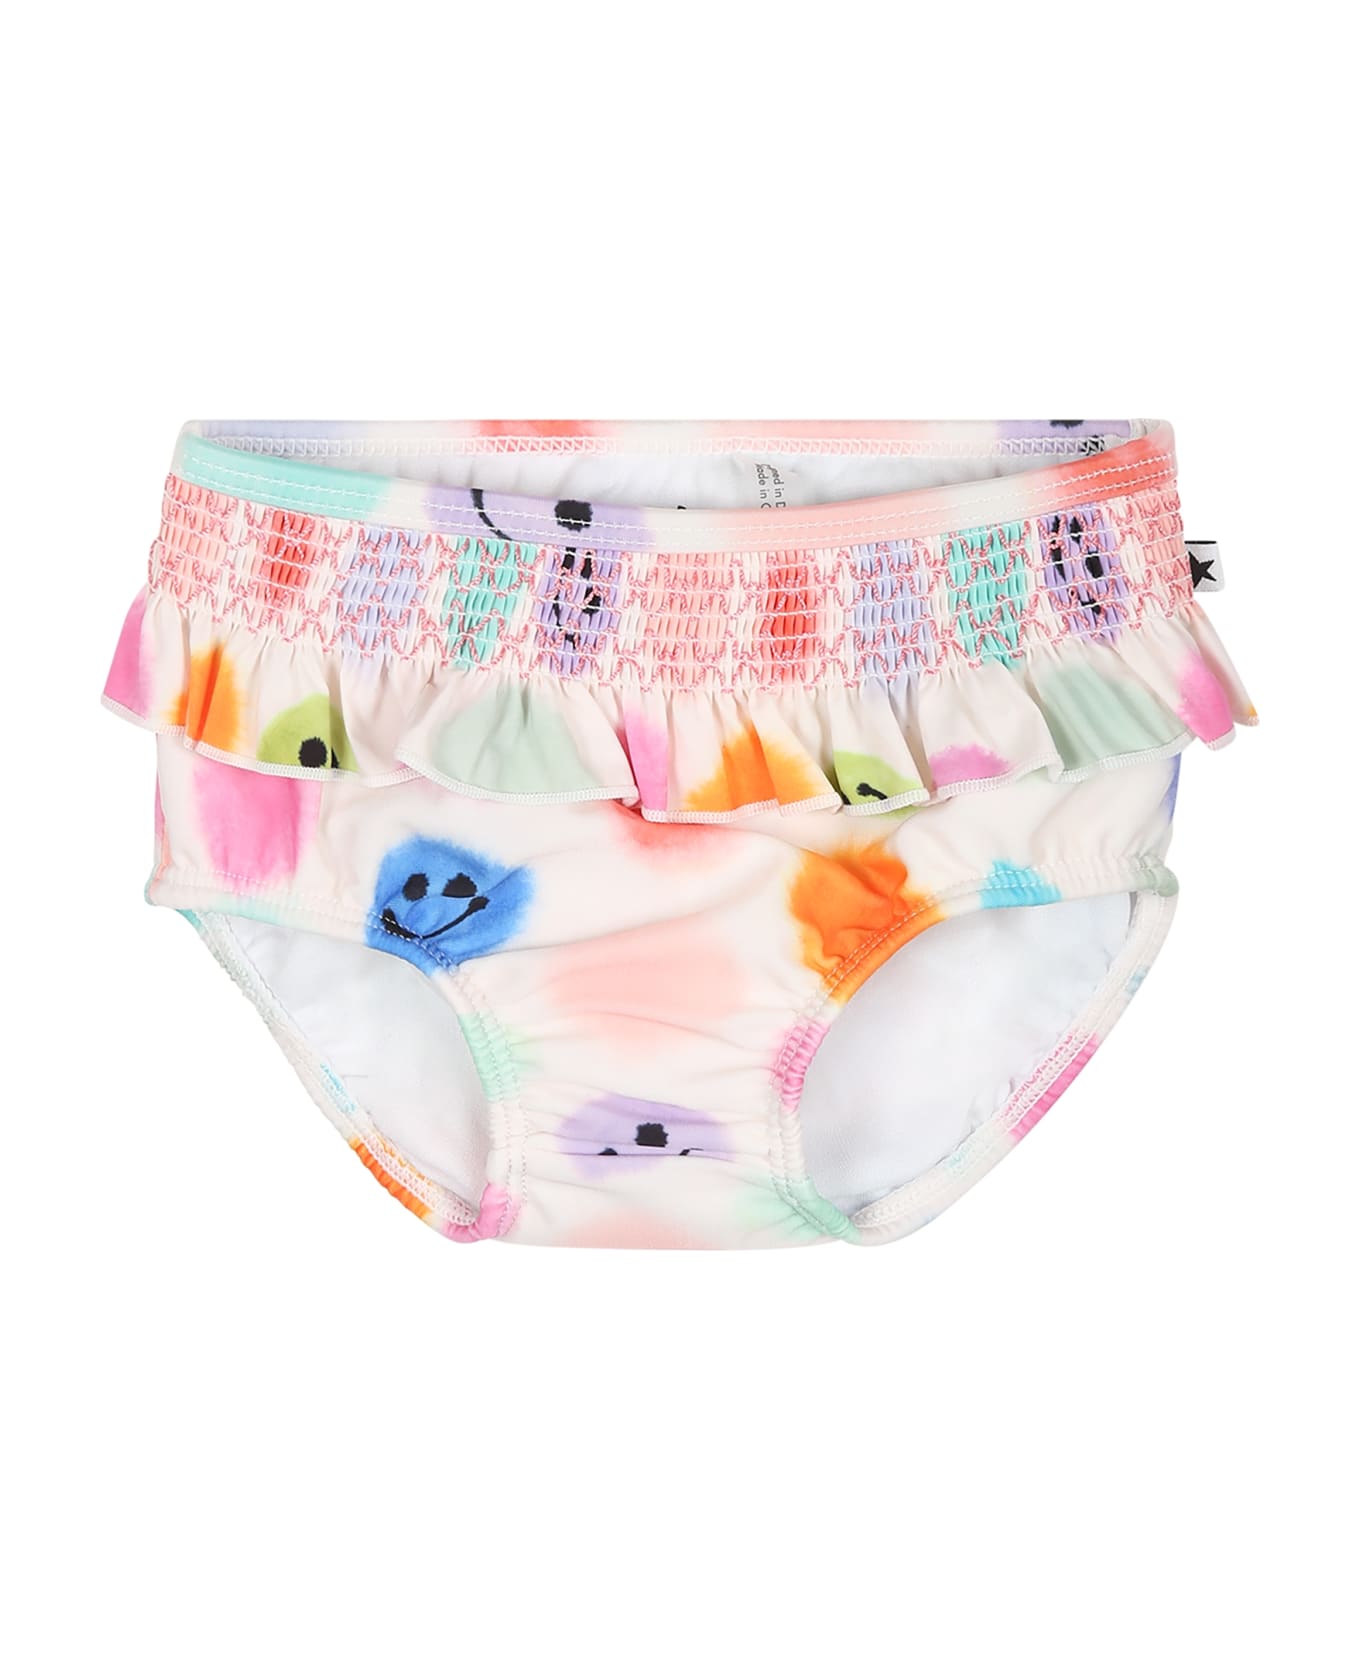 Molo White Swimbriefs For Baby Girl With Polka Dots And Smile - Multicolor 水着